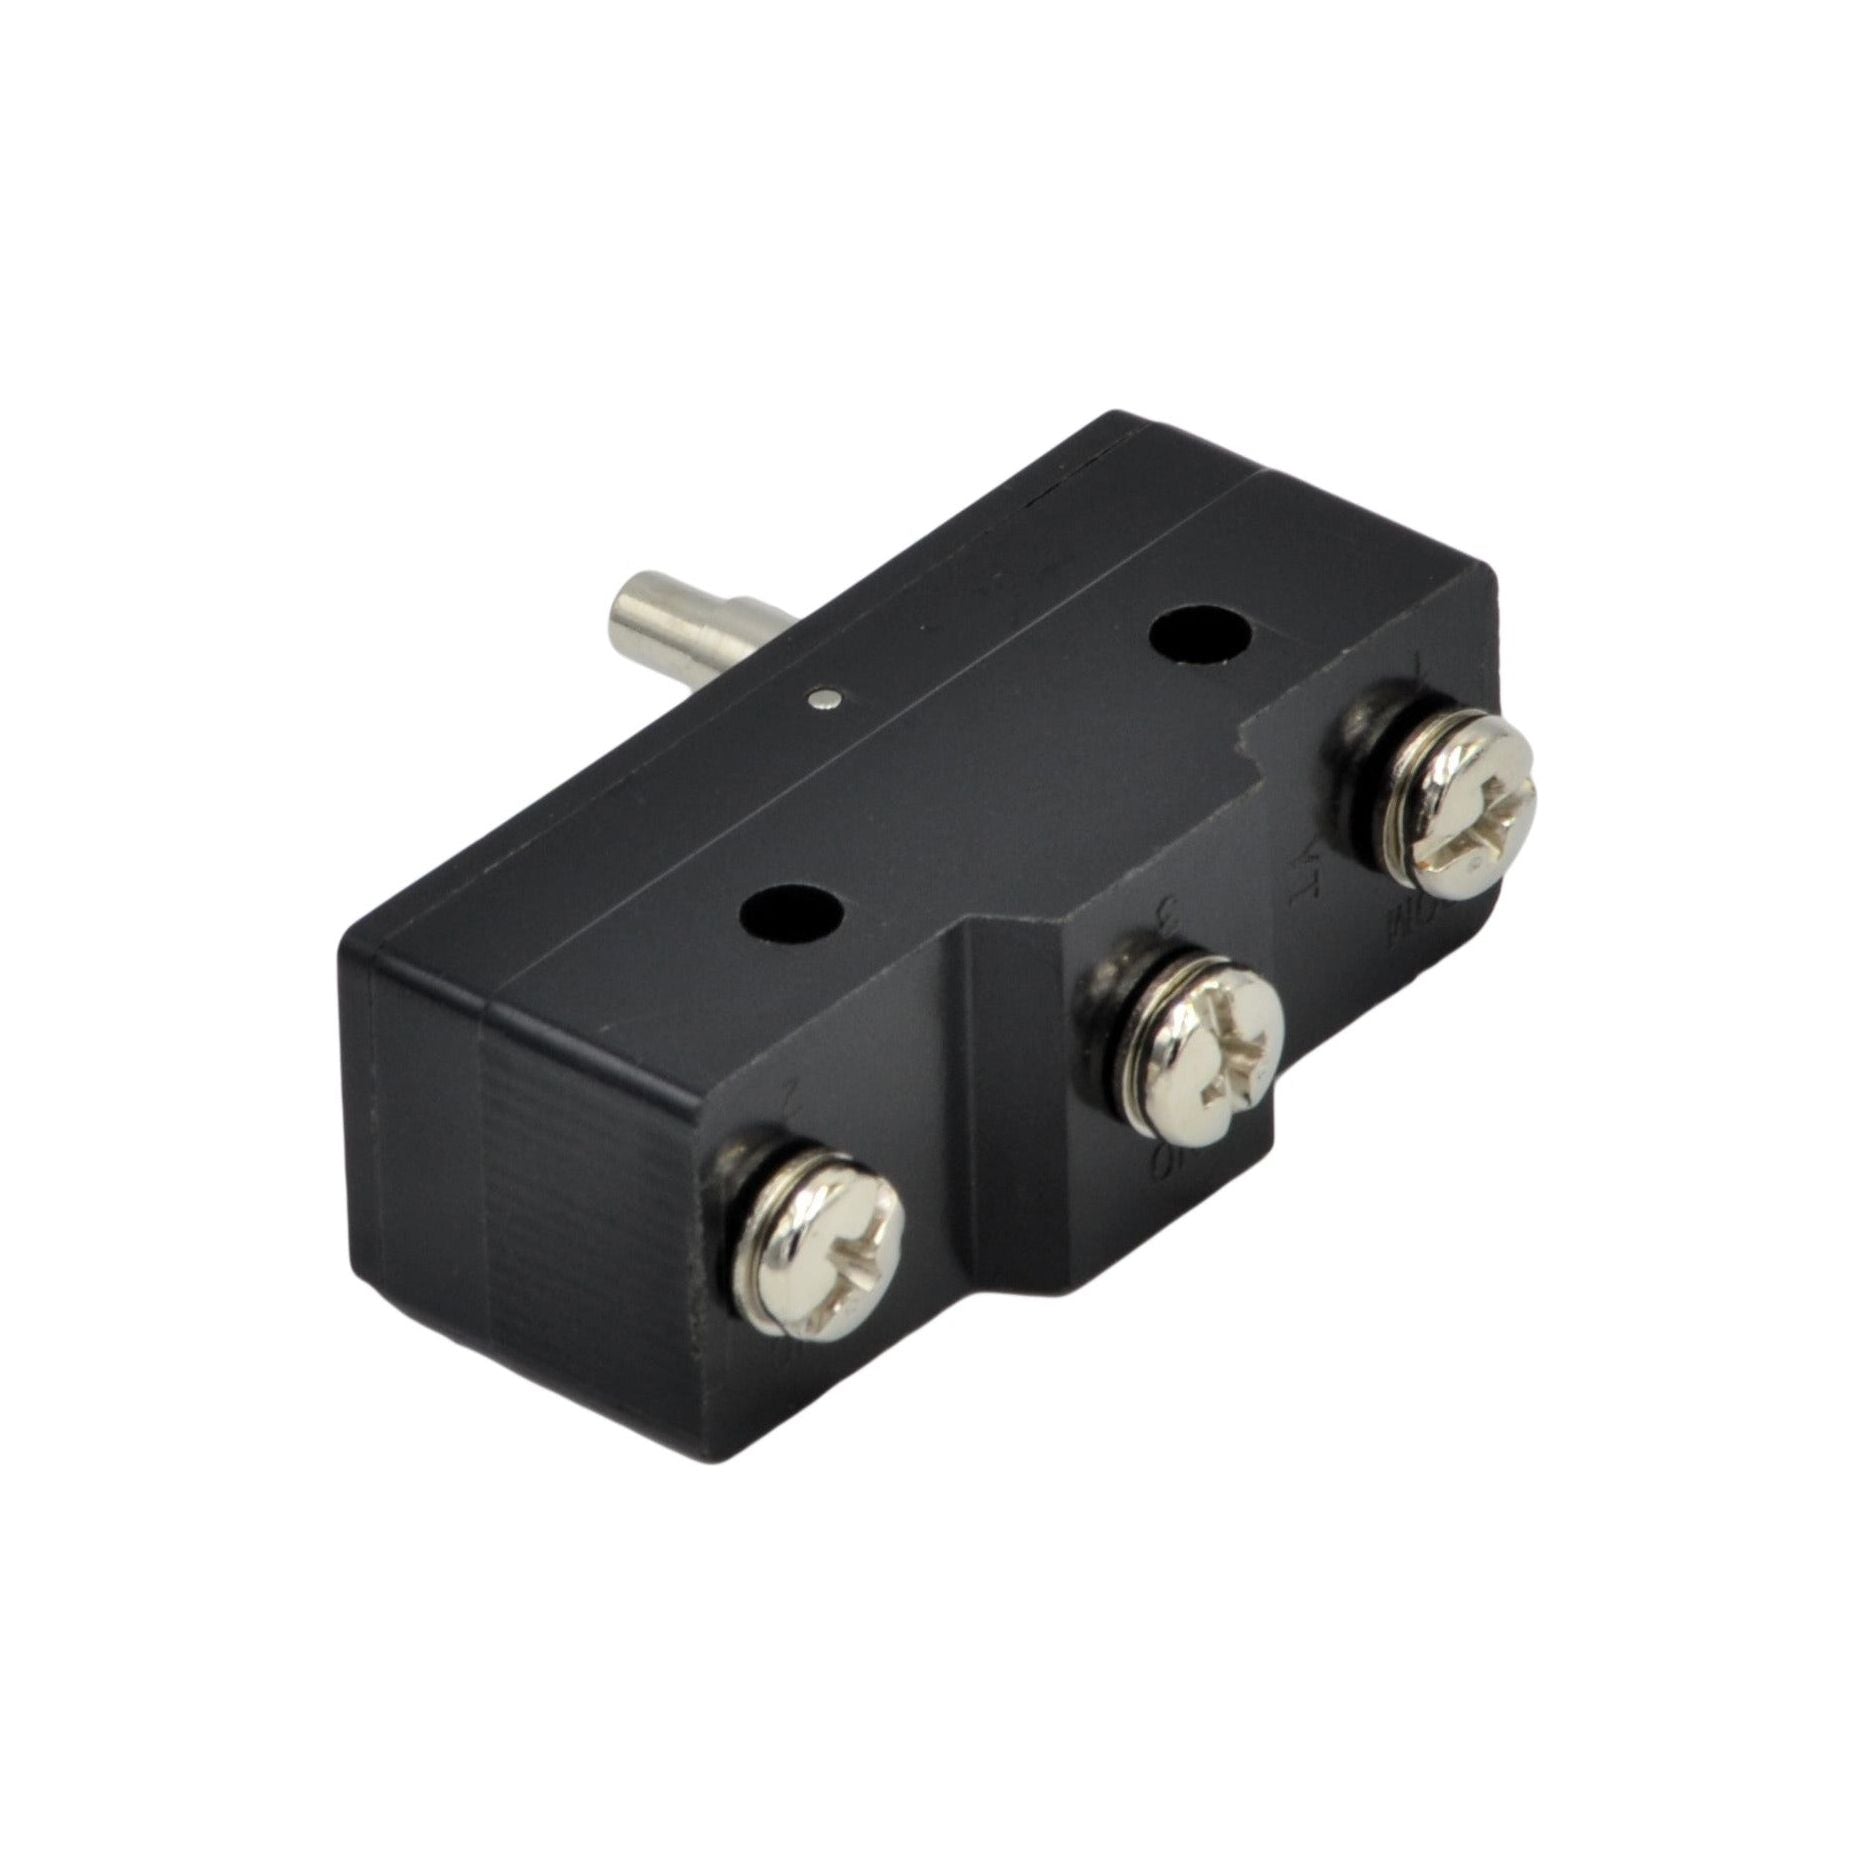 Z-15GS-B Spring Plunger Micro Limit Switch